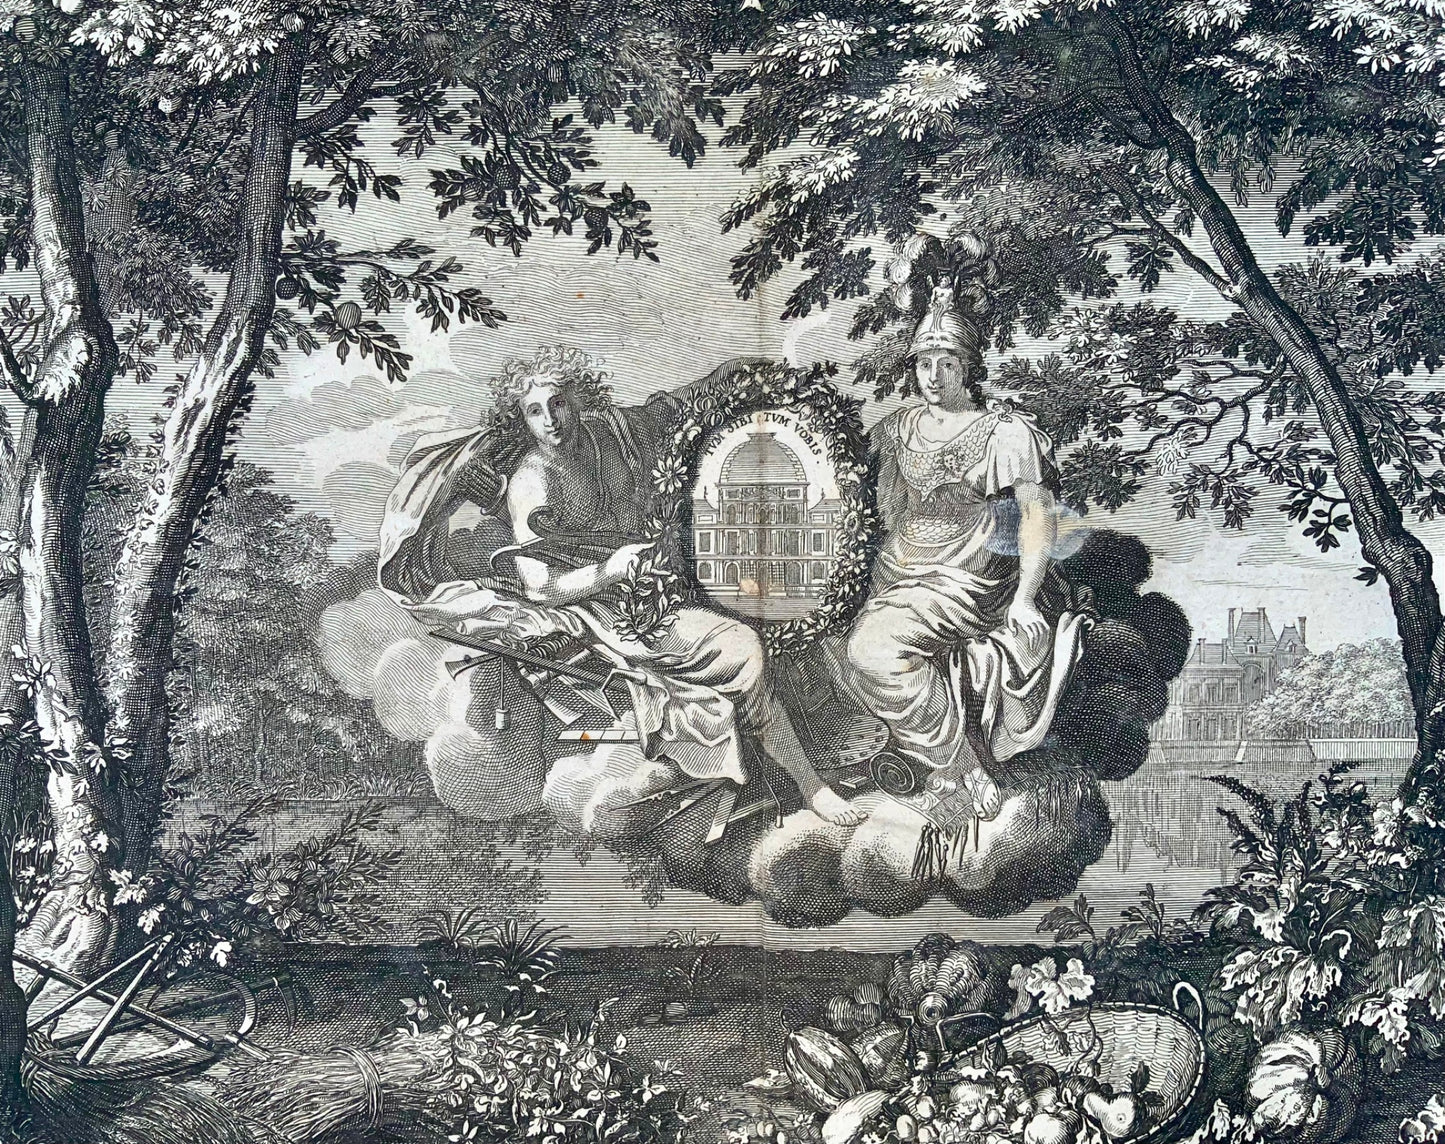 1679 Summer, double page allegorical tapestry engraving, Le Brun; Le Clerc, bota